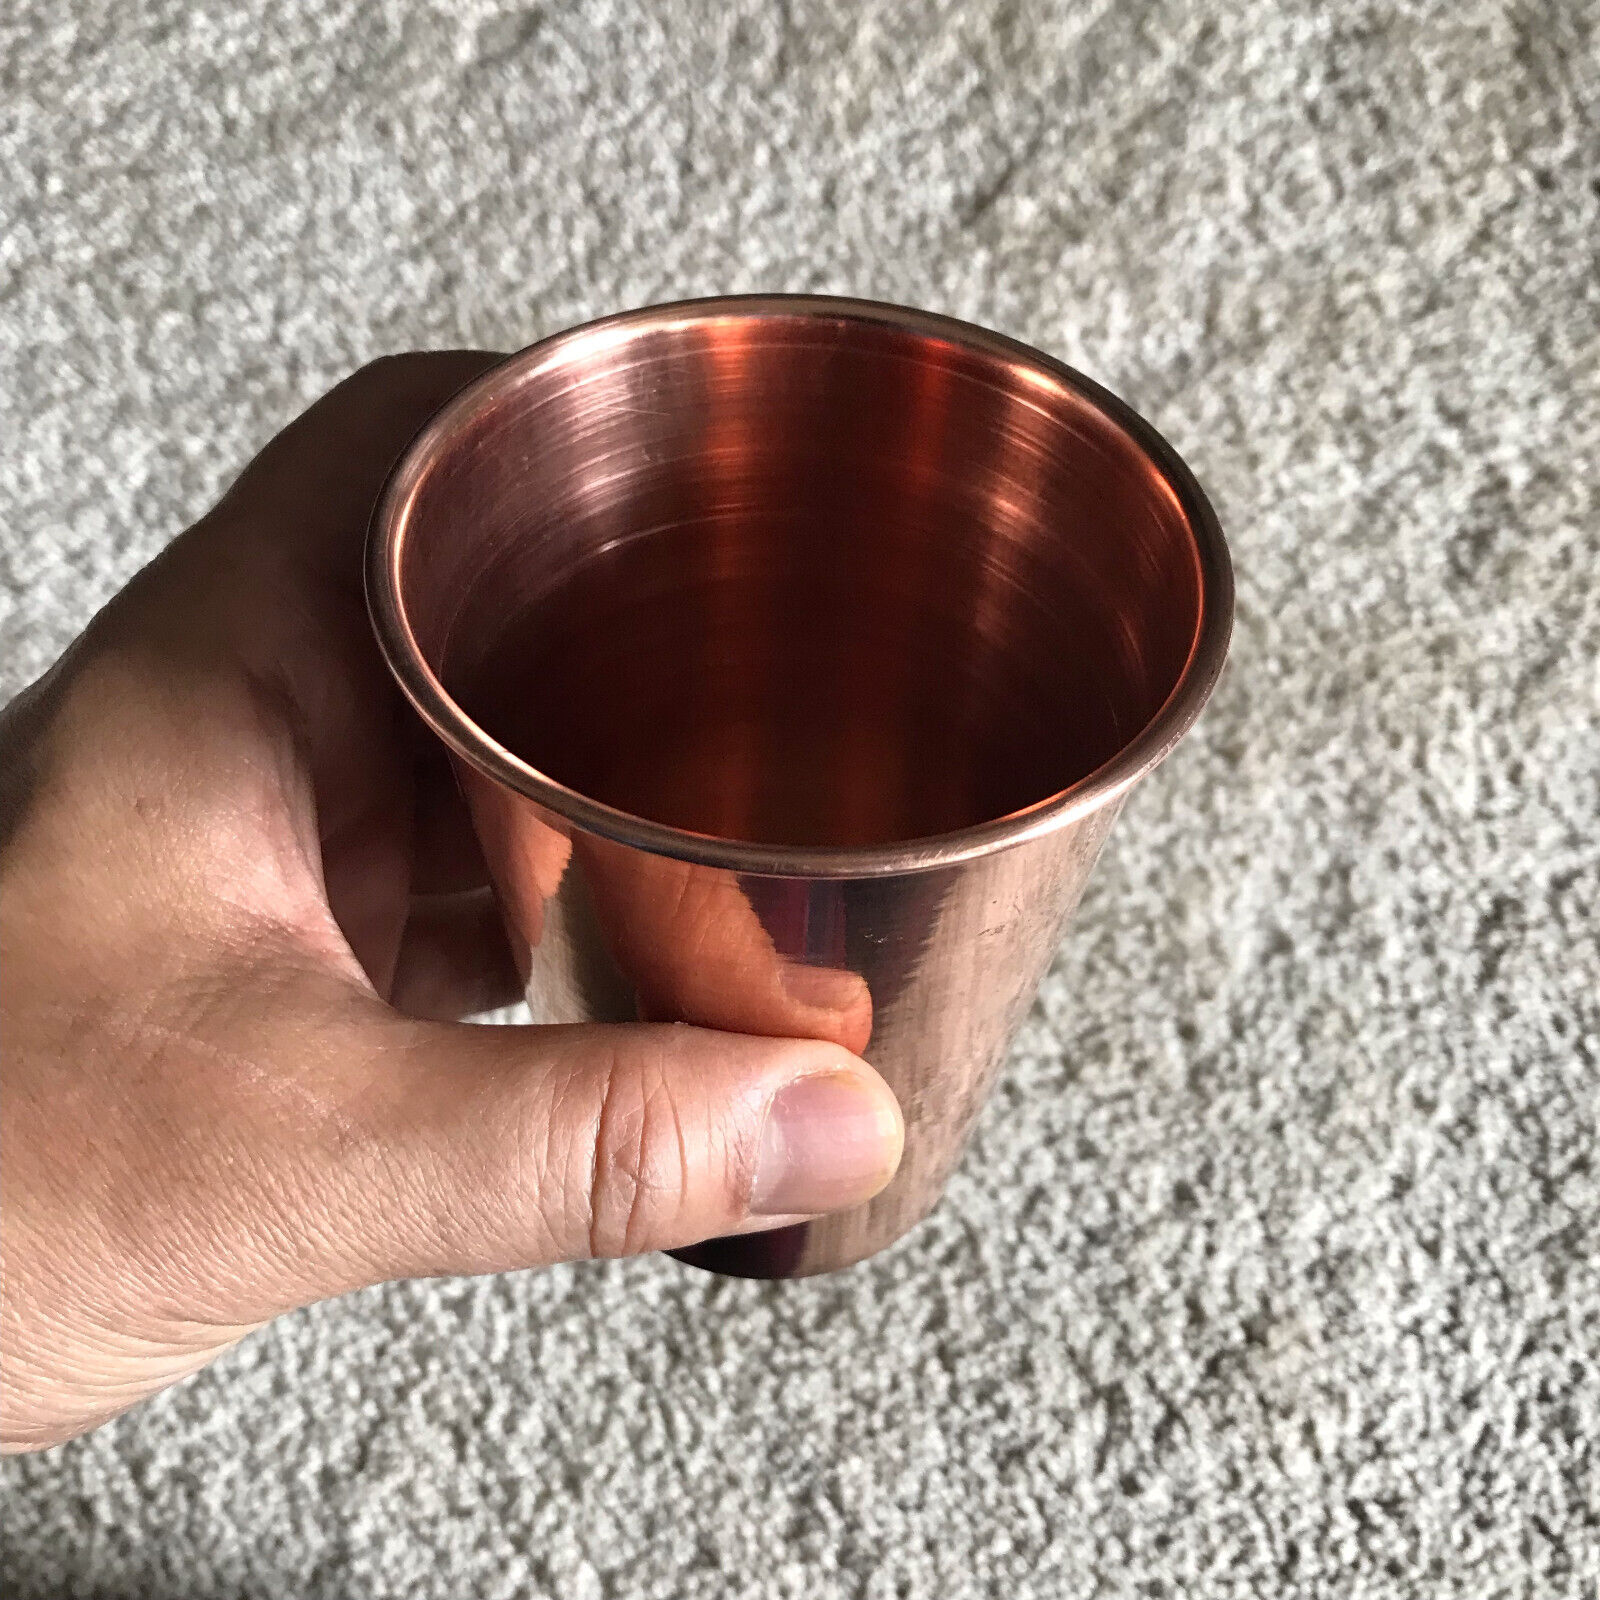 2 Quantity Cup Genuine Copper Water Drink Mug Pure Solid ship from USA to USA